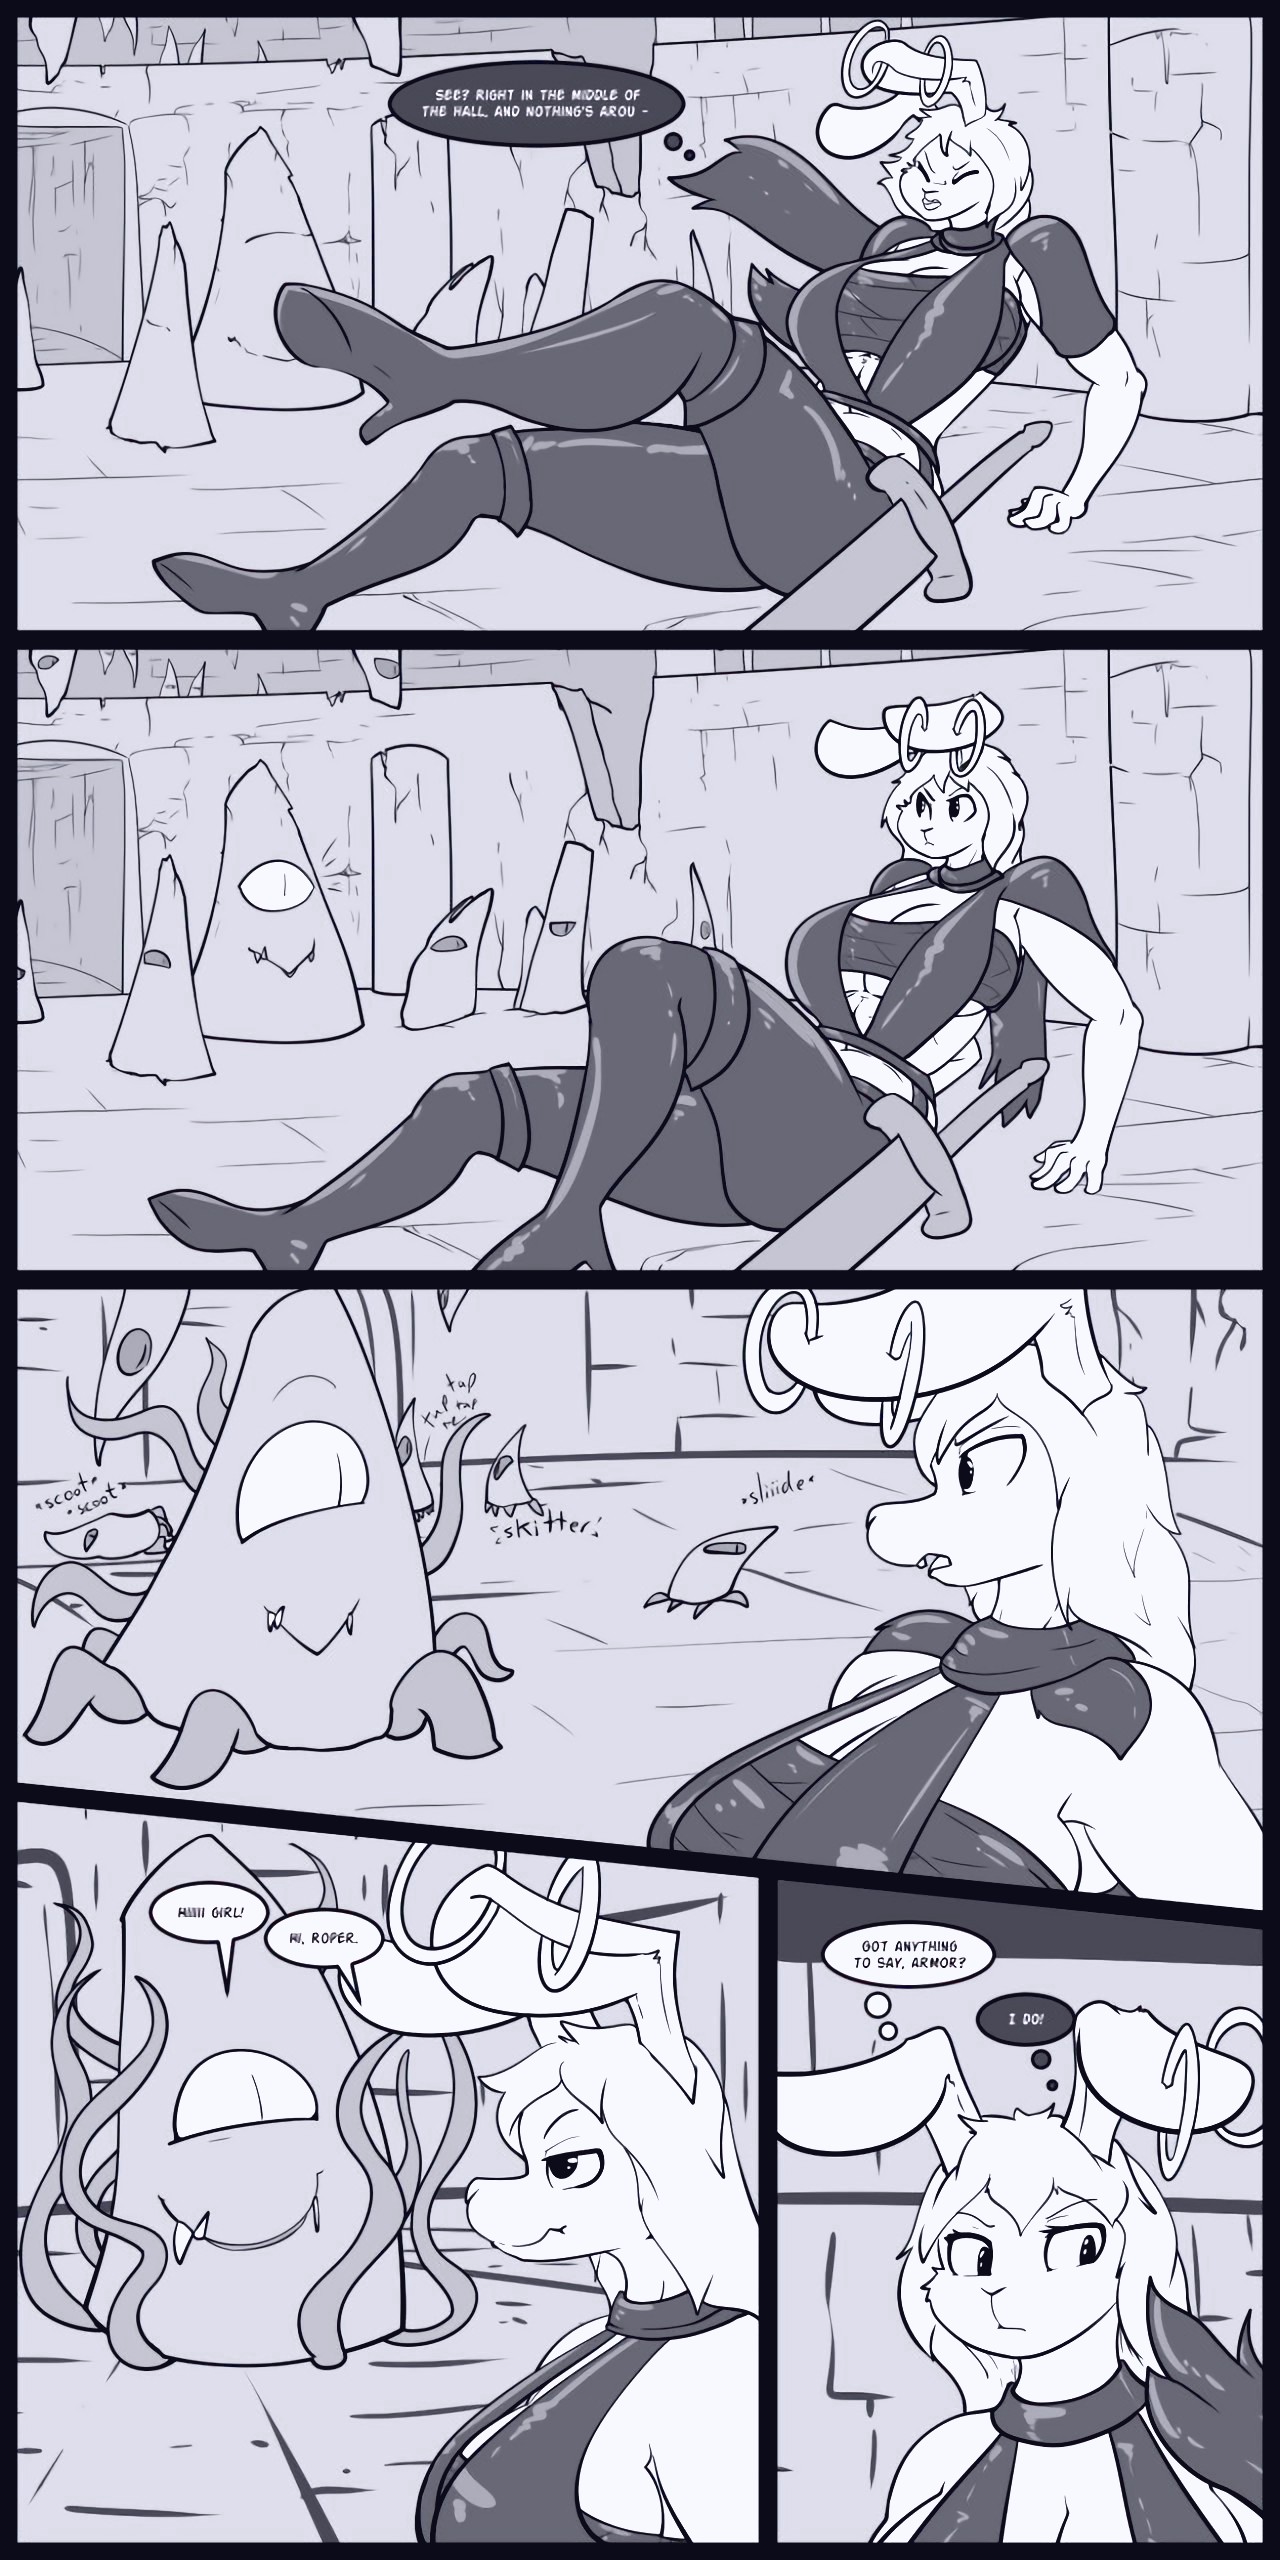 Rough Situation 2 page 04